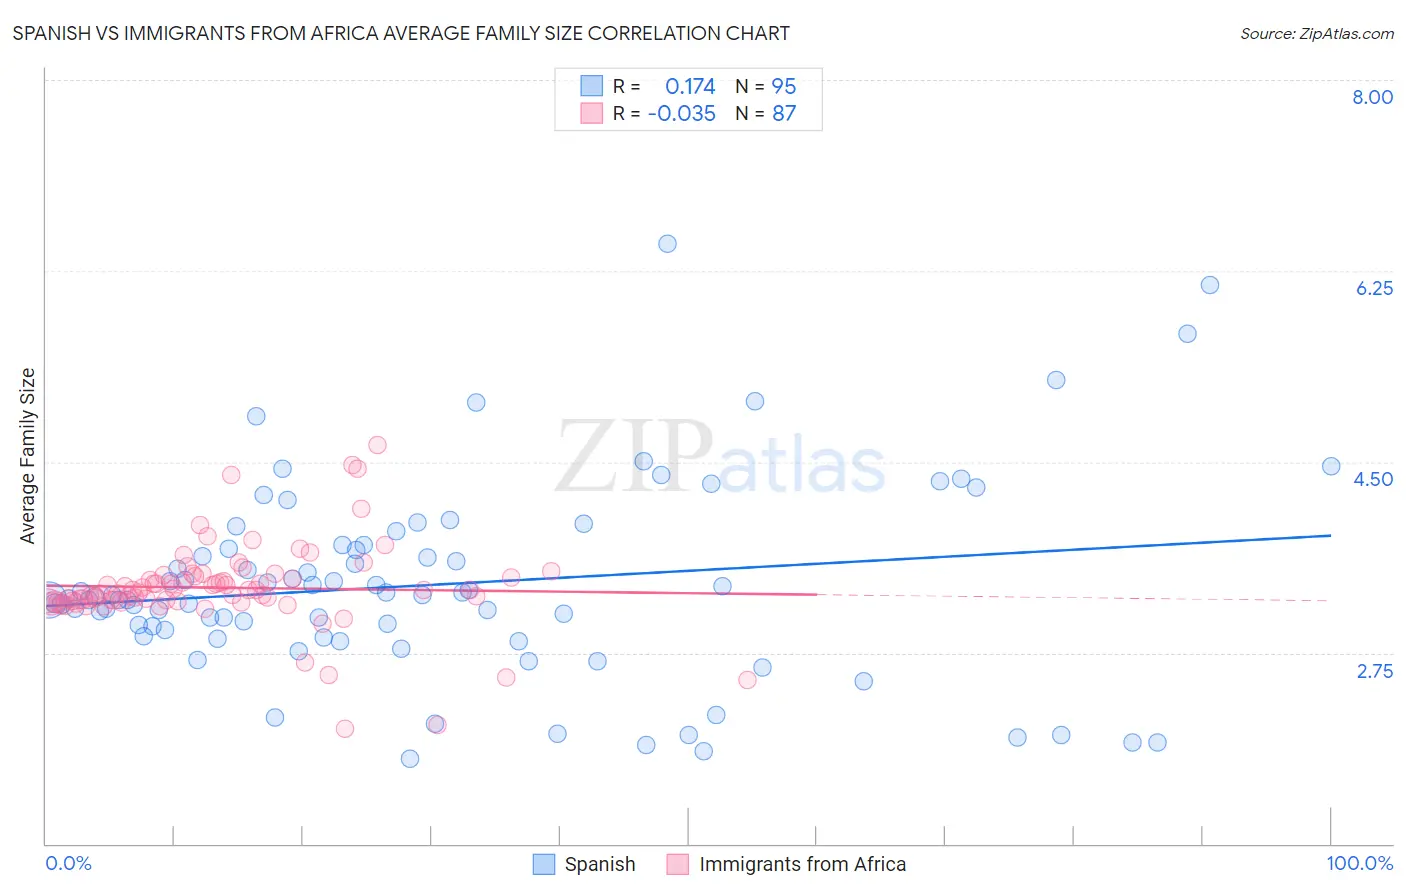 Spanish vs Immigrants from Africa Average Family Size